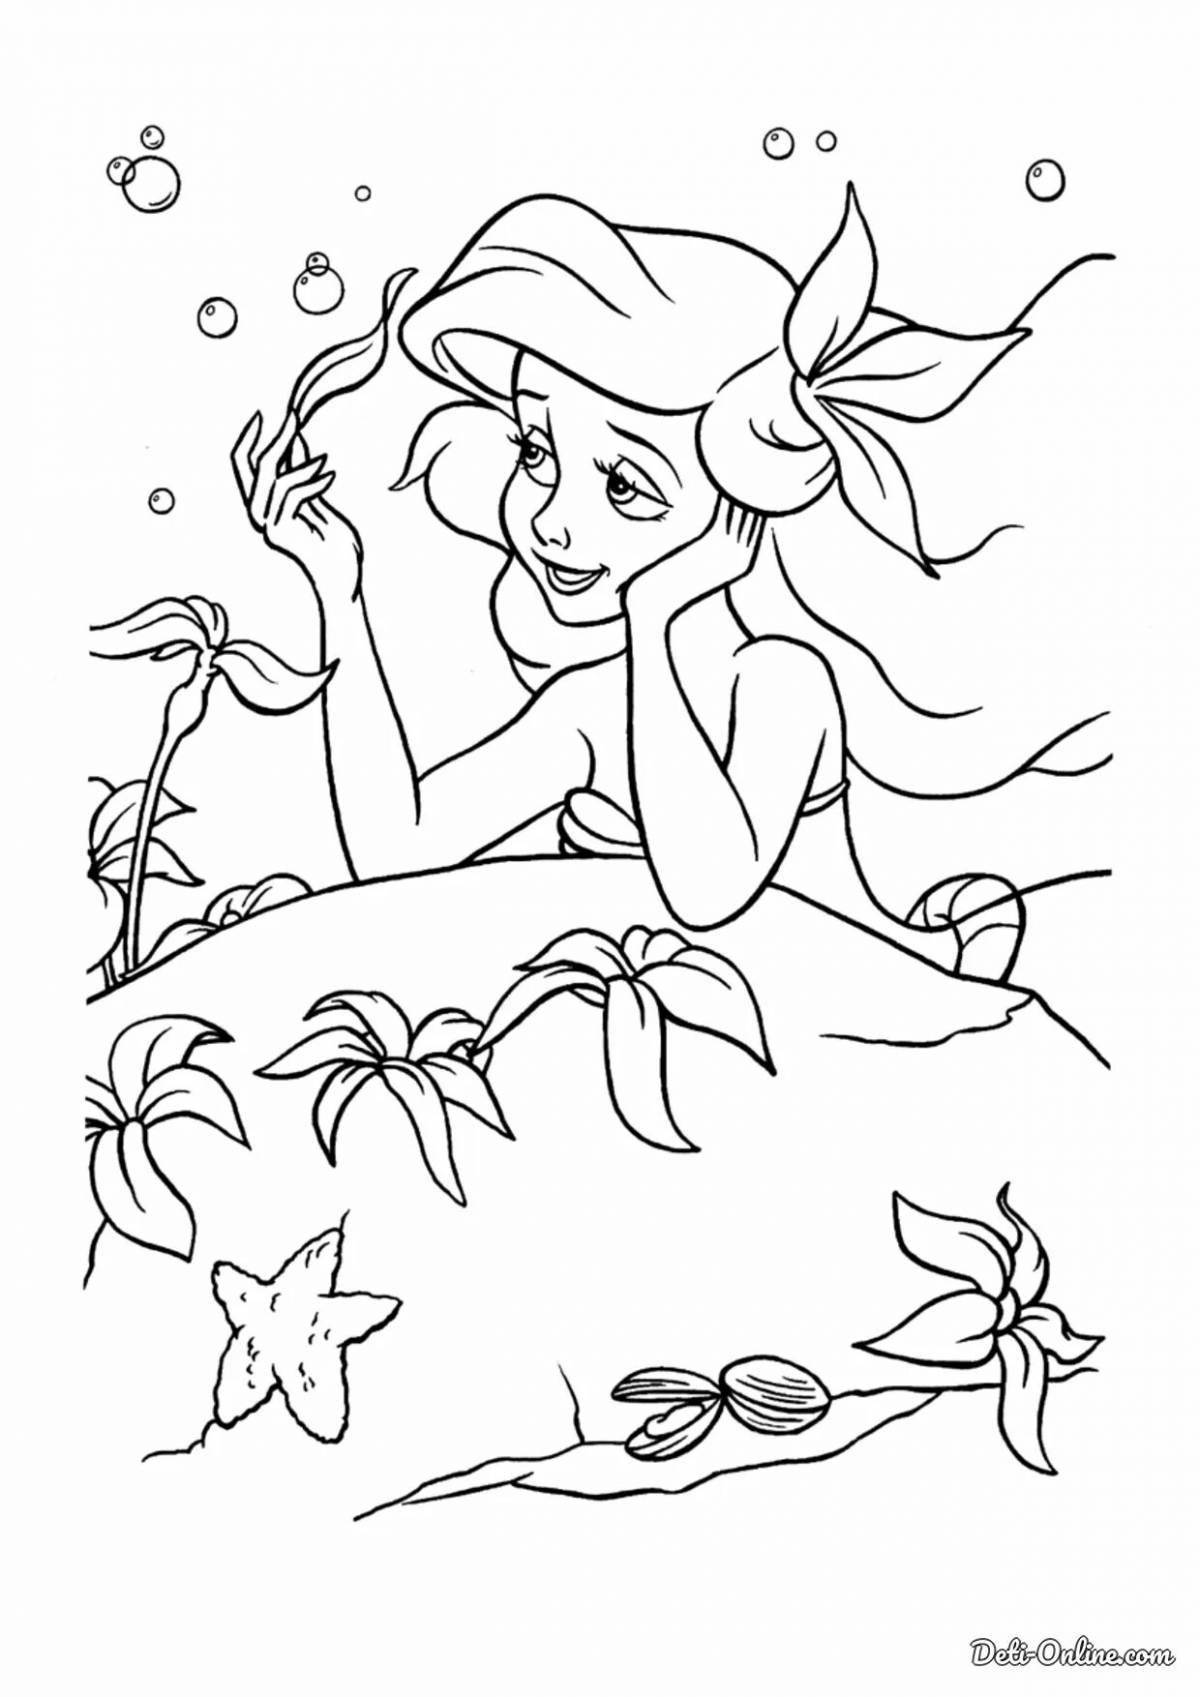 Coloring page charming little mermaid